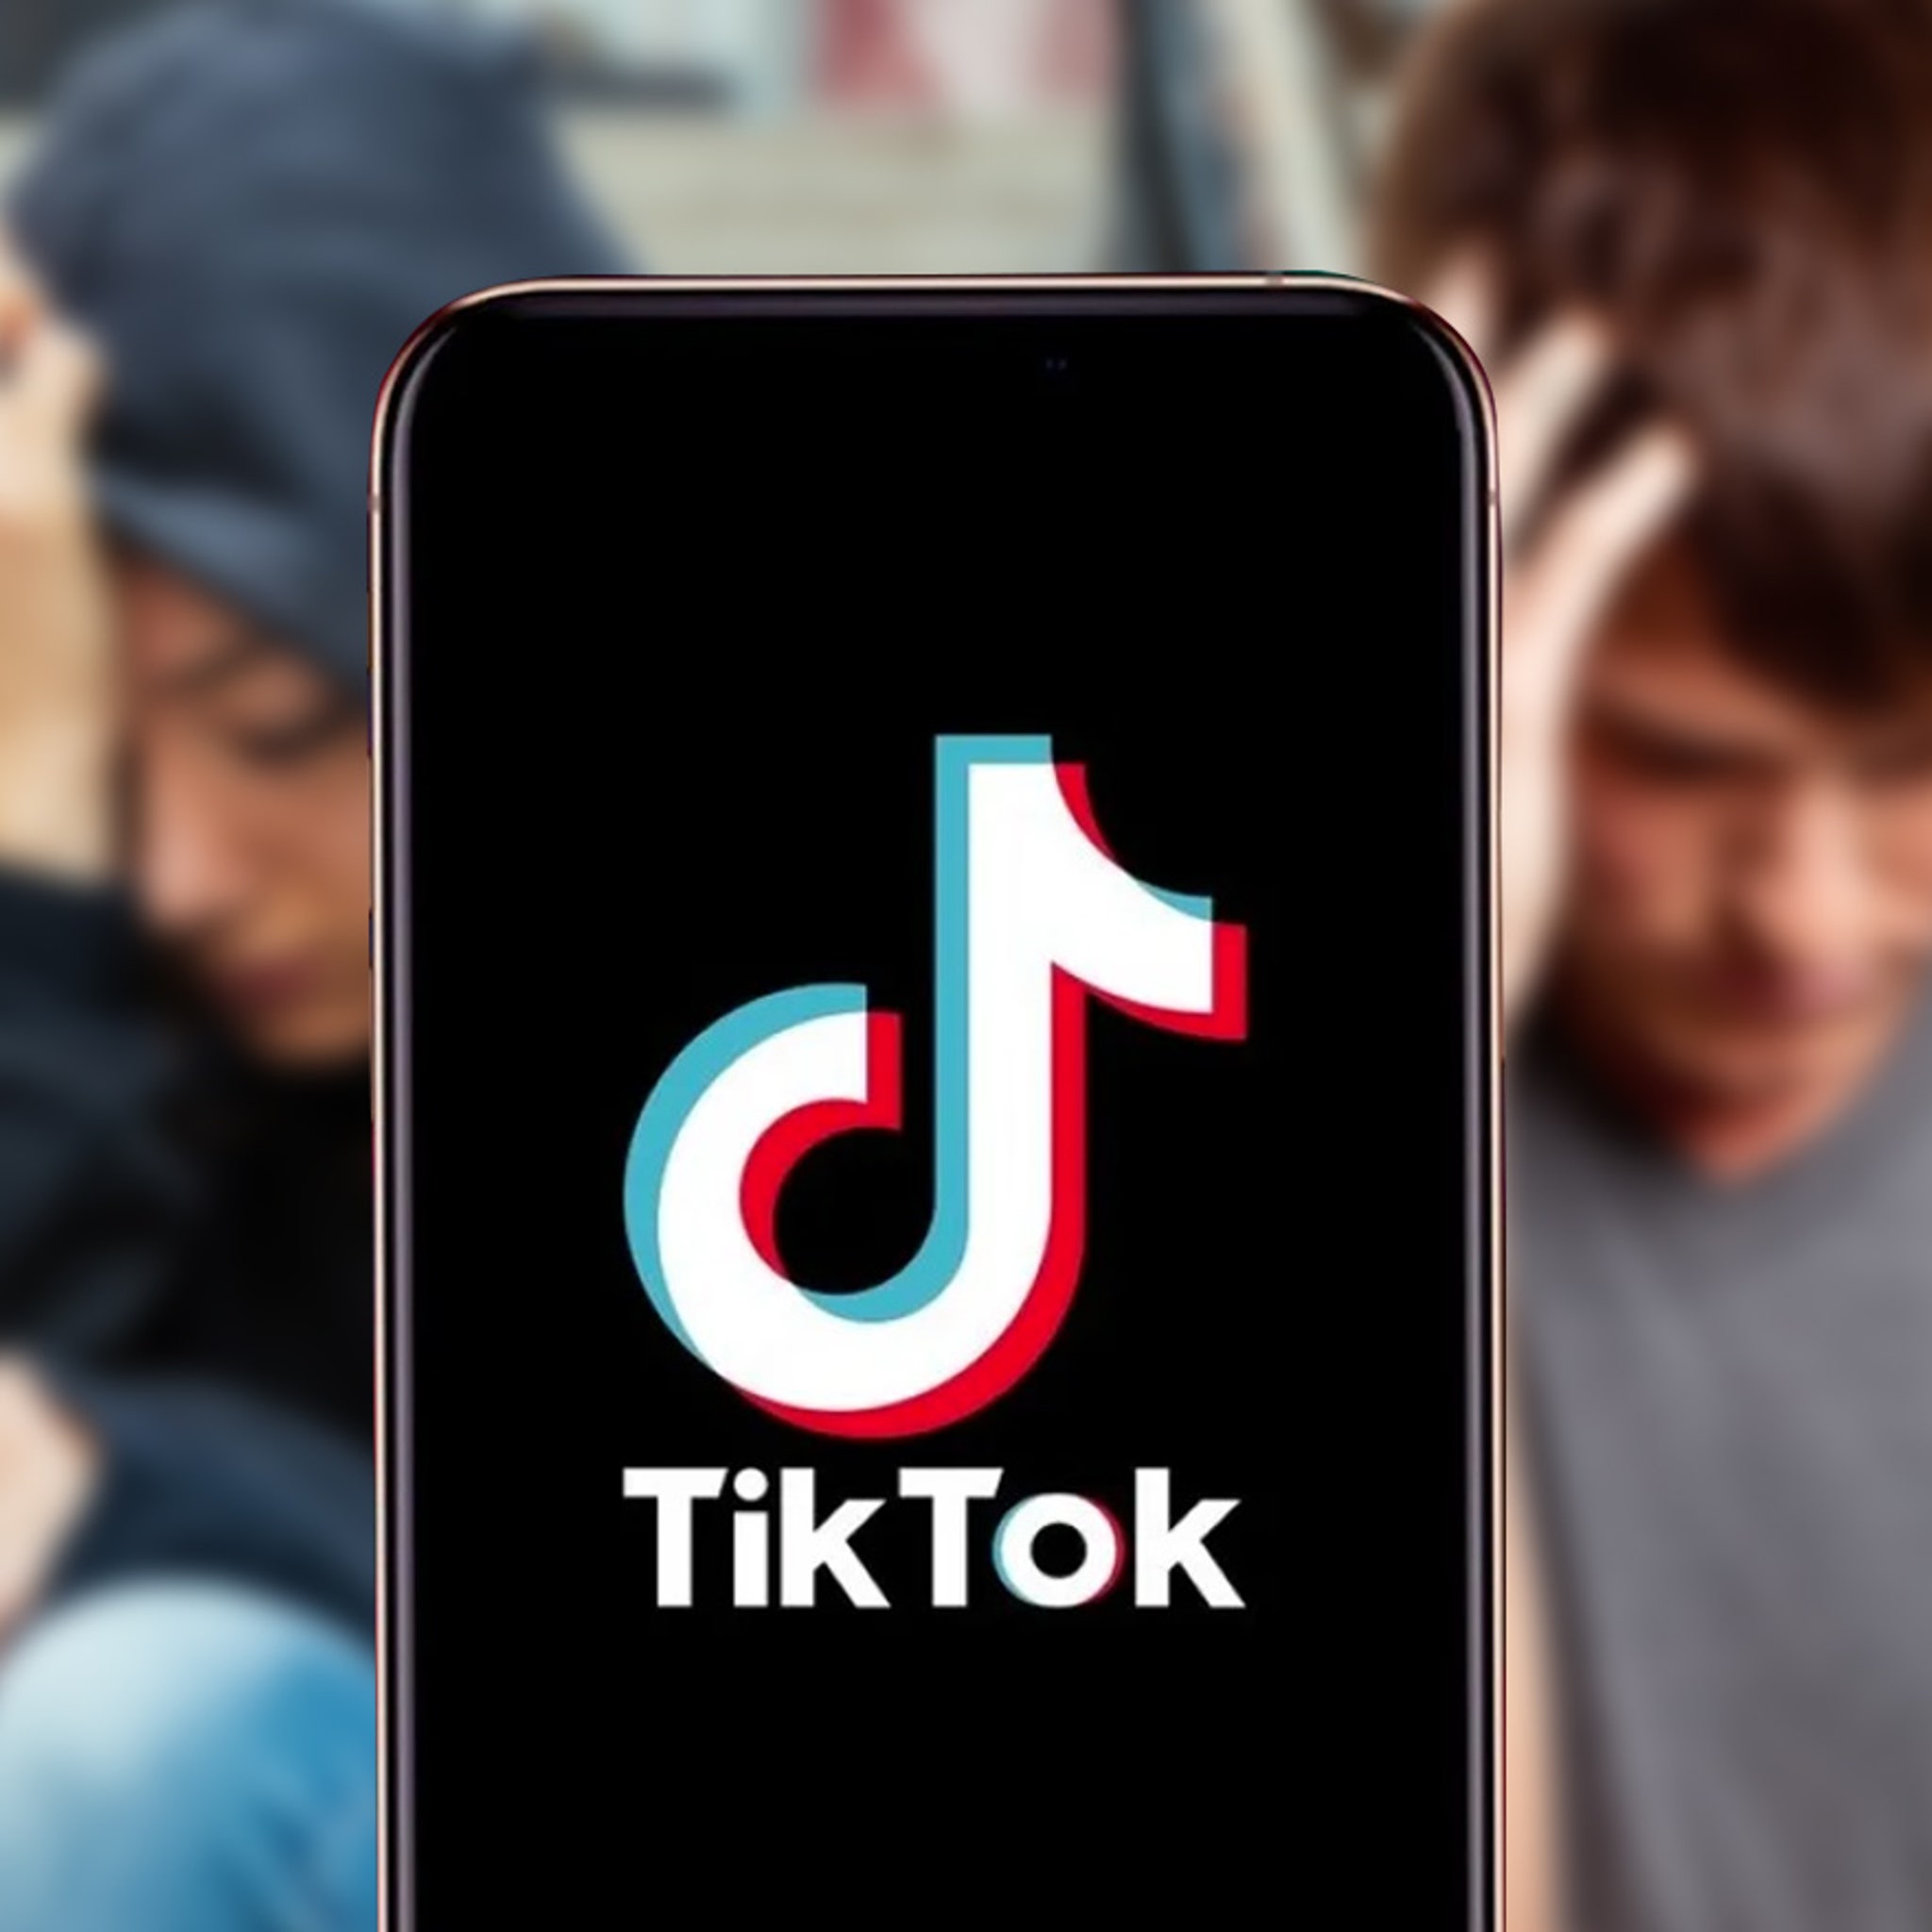 TikTok's fashion creators forge ahead in face of potential US ban